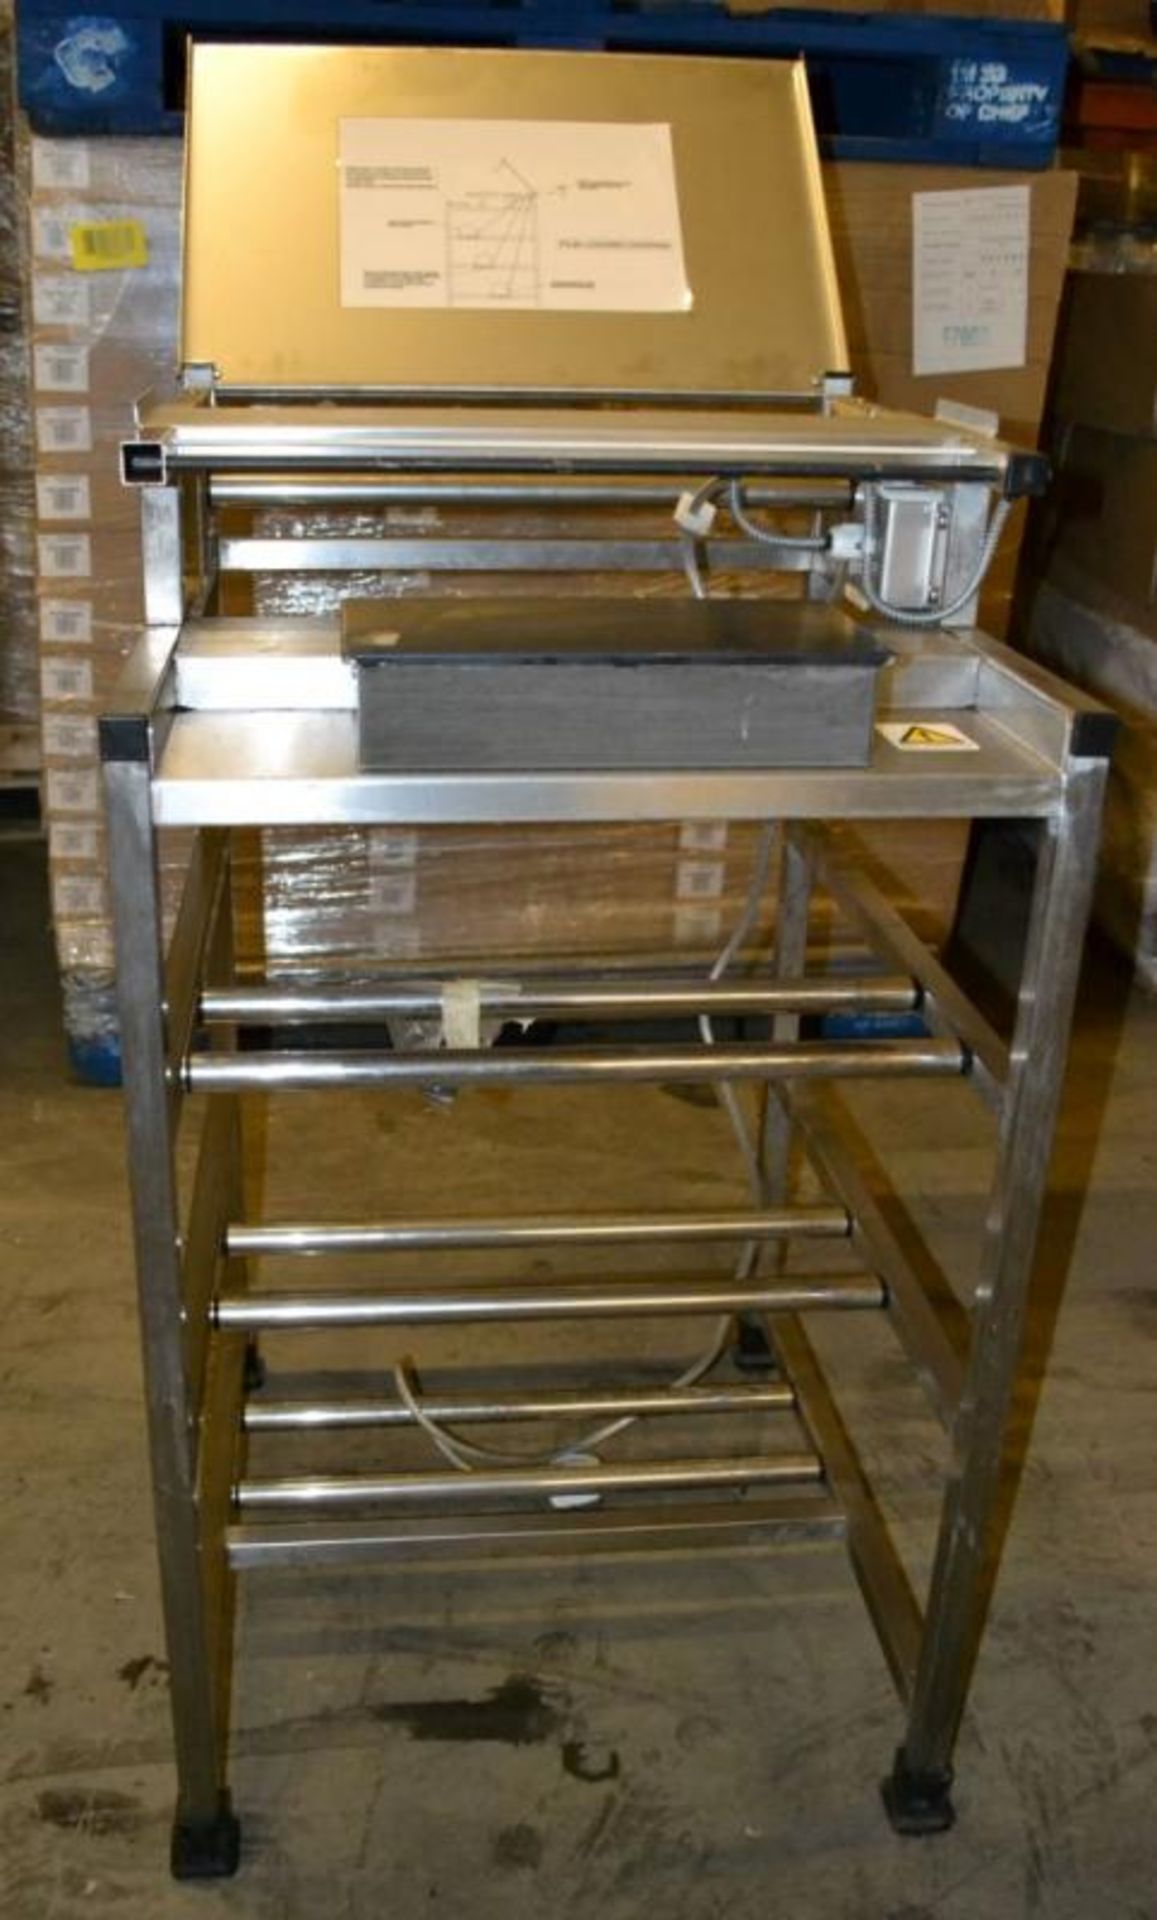 1 x Metalcraft Tray Stretch Wrapping Machine - Dimensions: 56 x 61.5 x 94.5cm - Ref: MC139 - CL282 - - Image 8 of 10